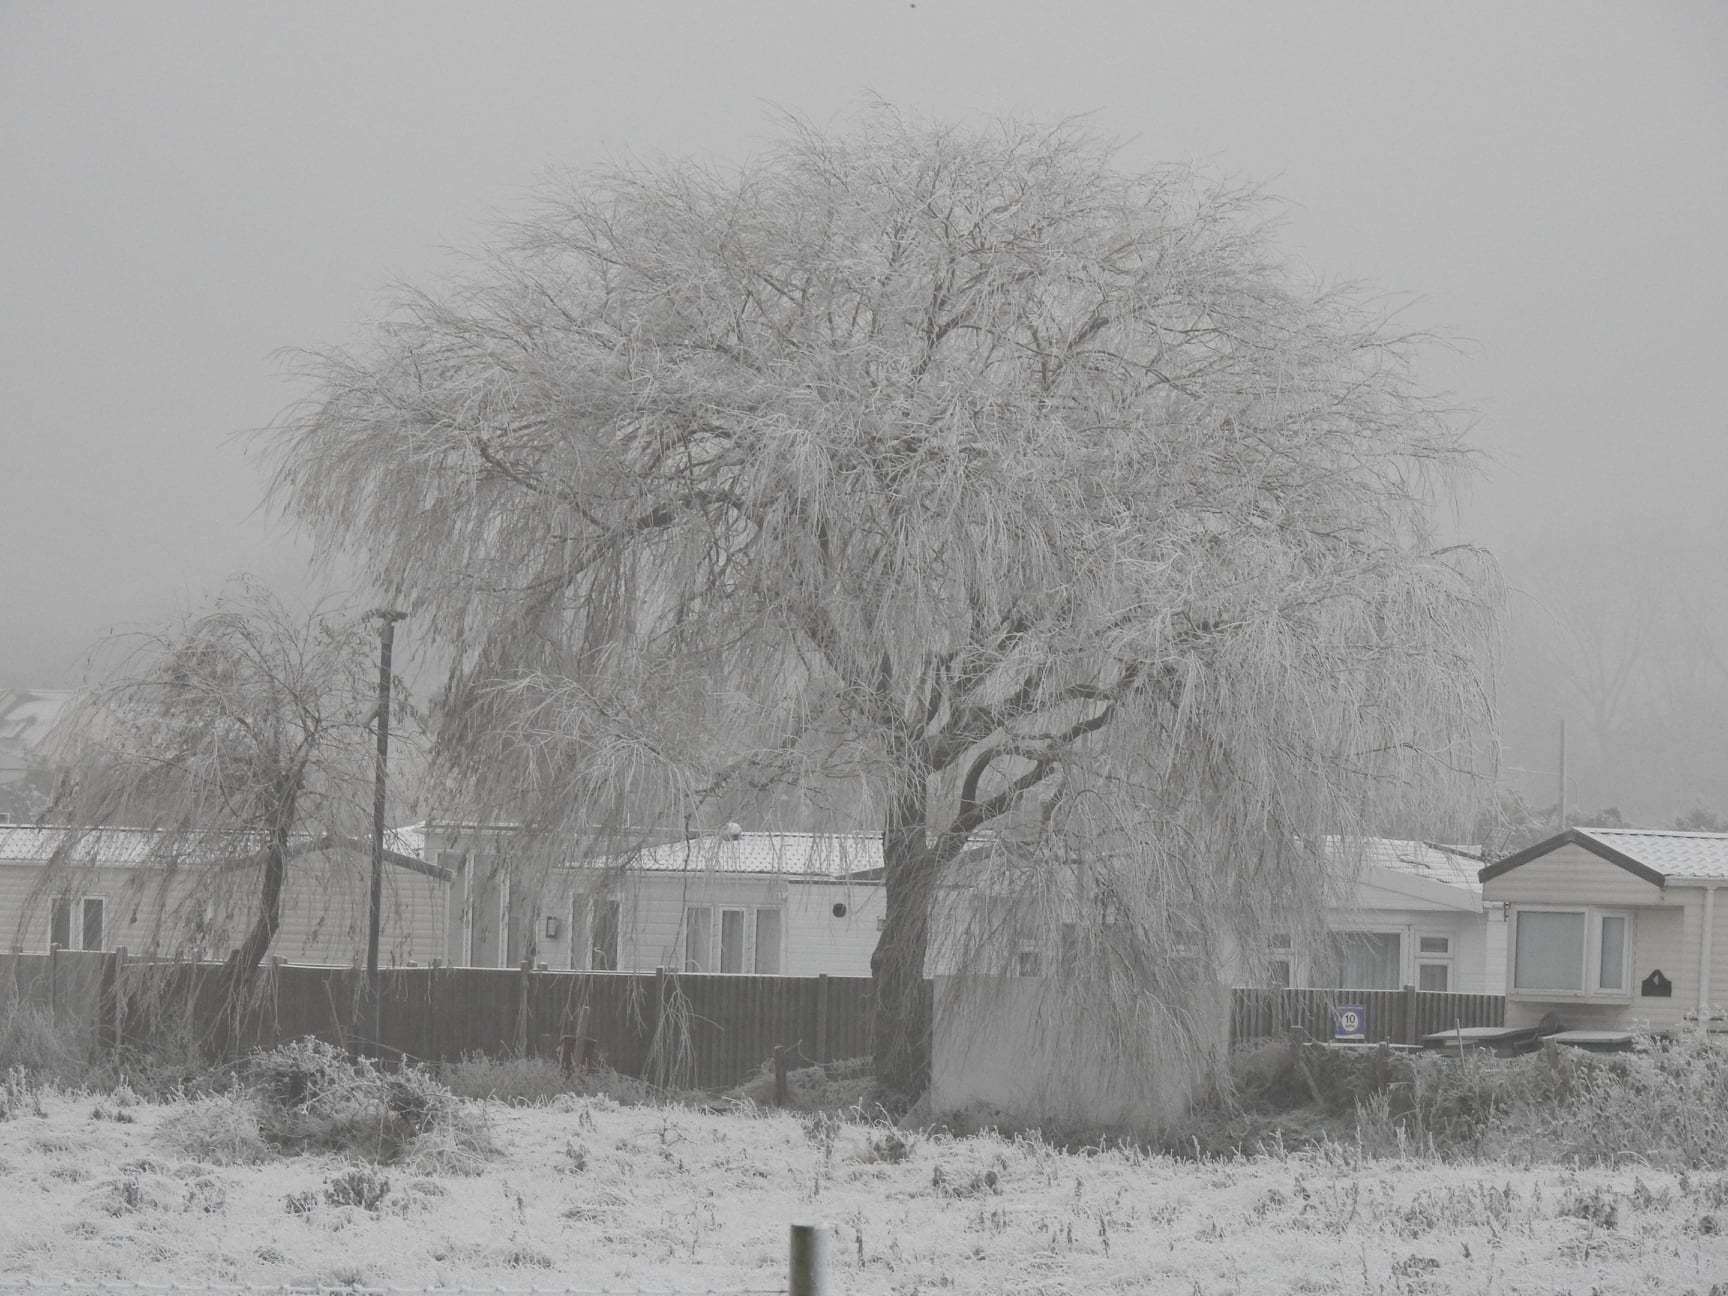 Sunday snow: definitely not, says Adam Young of the Swale Weather website